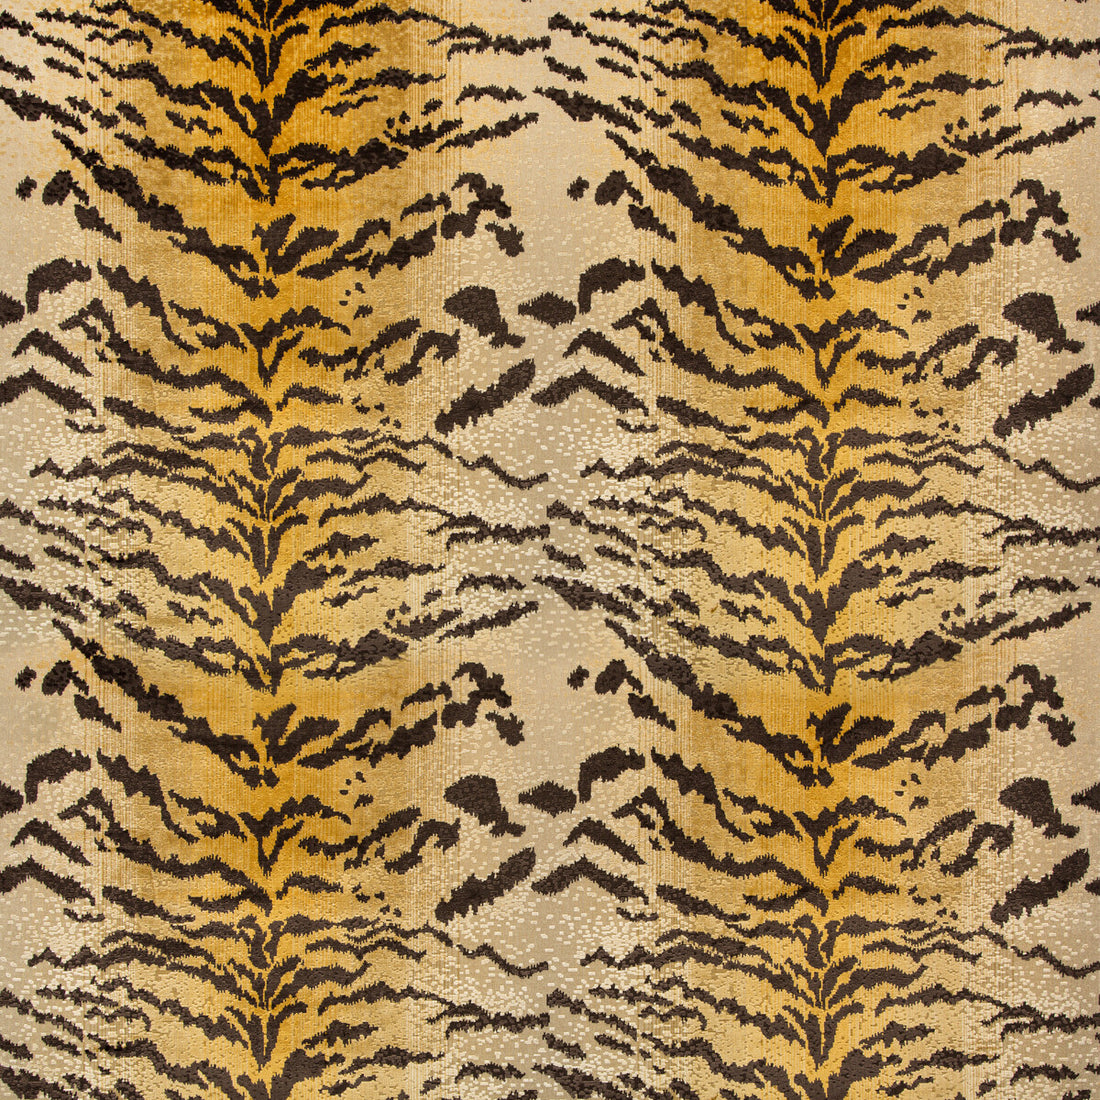 Le Tigre Velvet fabric in cognac color - pattern 8020118.46.0 - by Brunschwig &amp; Fils in the Chaumont Velvets collection